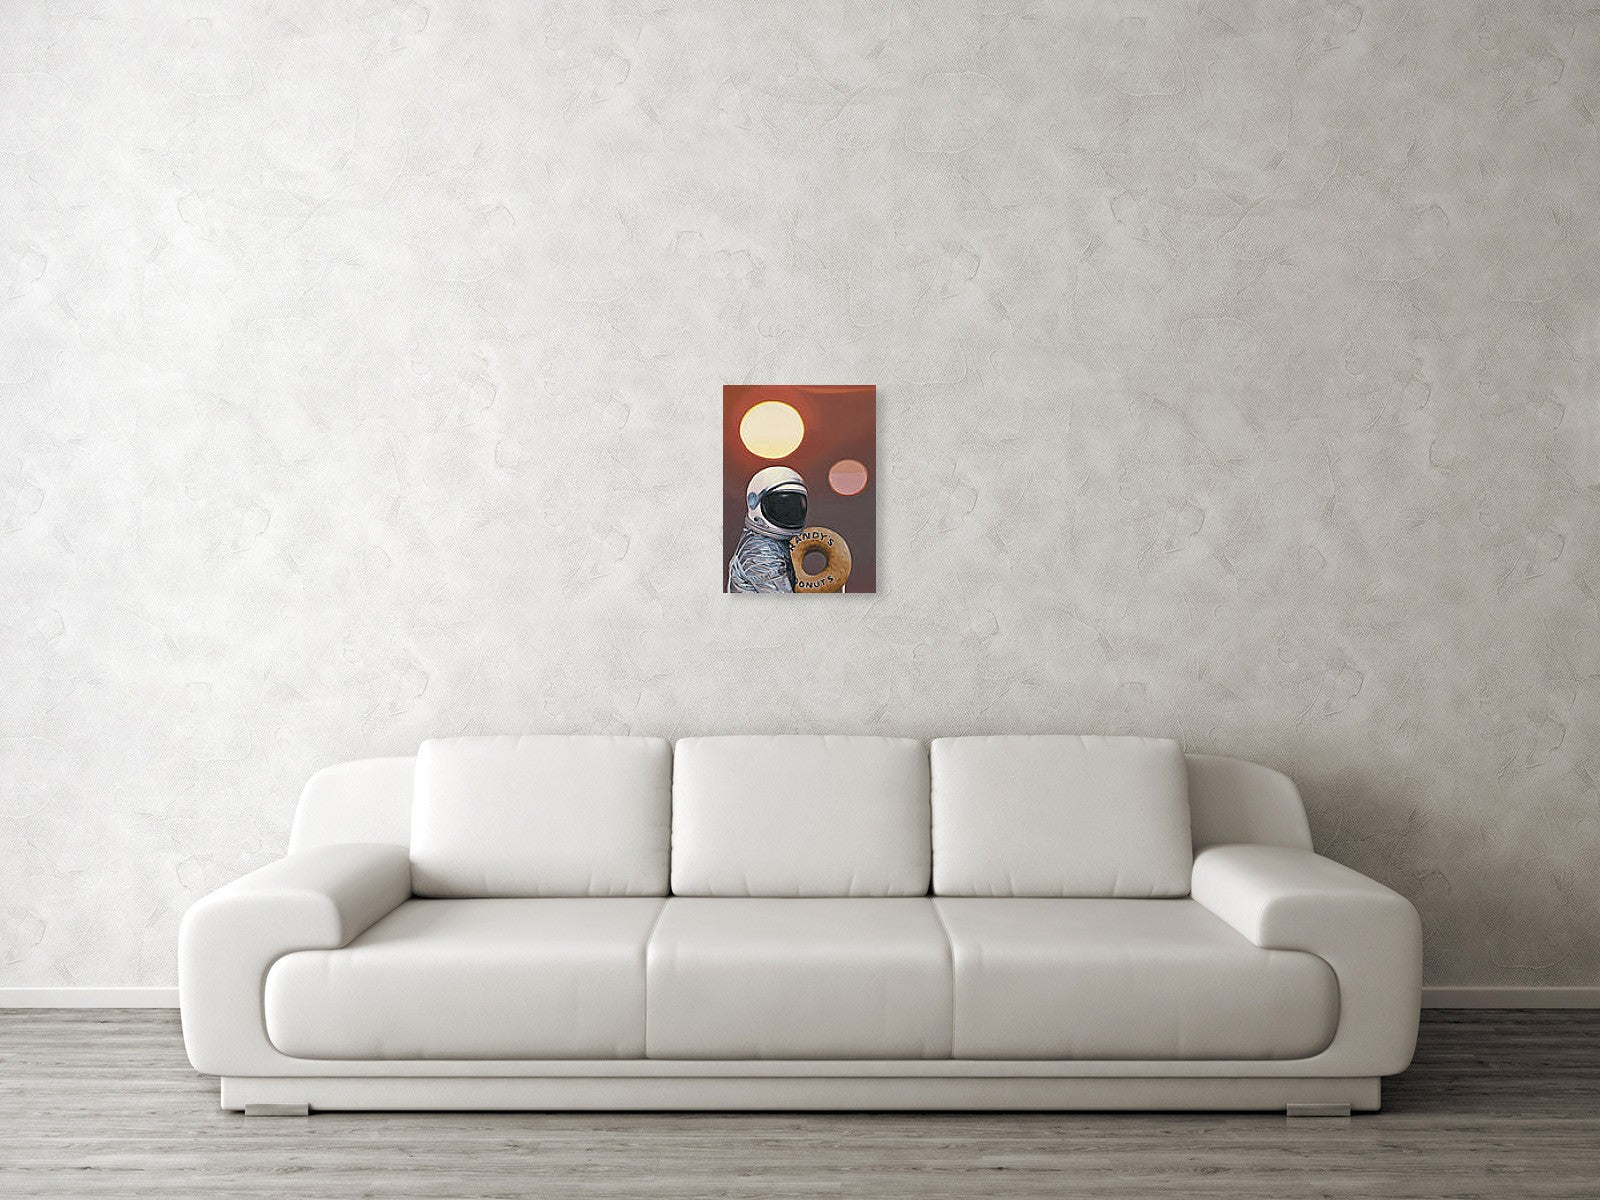 Twin Suns And Donuts Art Print Canvas And Poster, Warm Home Decor Wall Art Visual Art 1617268381268.jpg